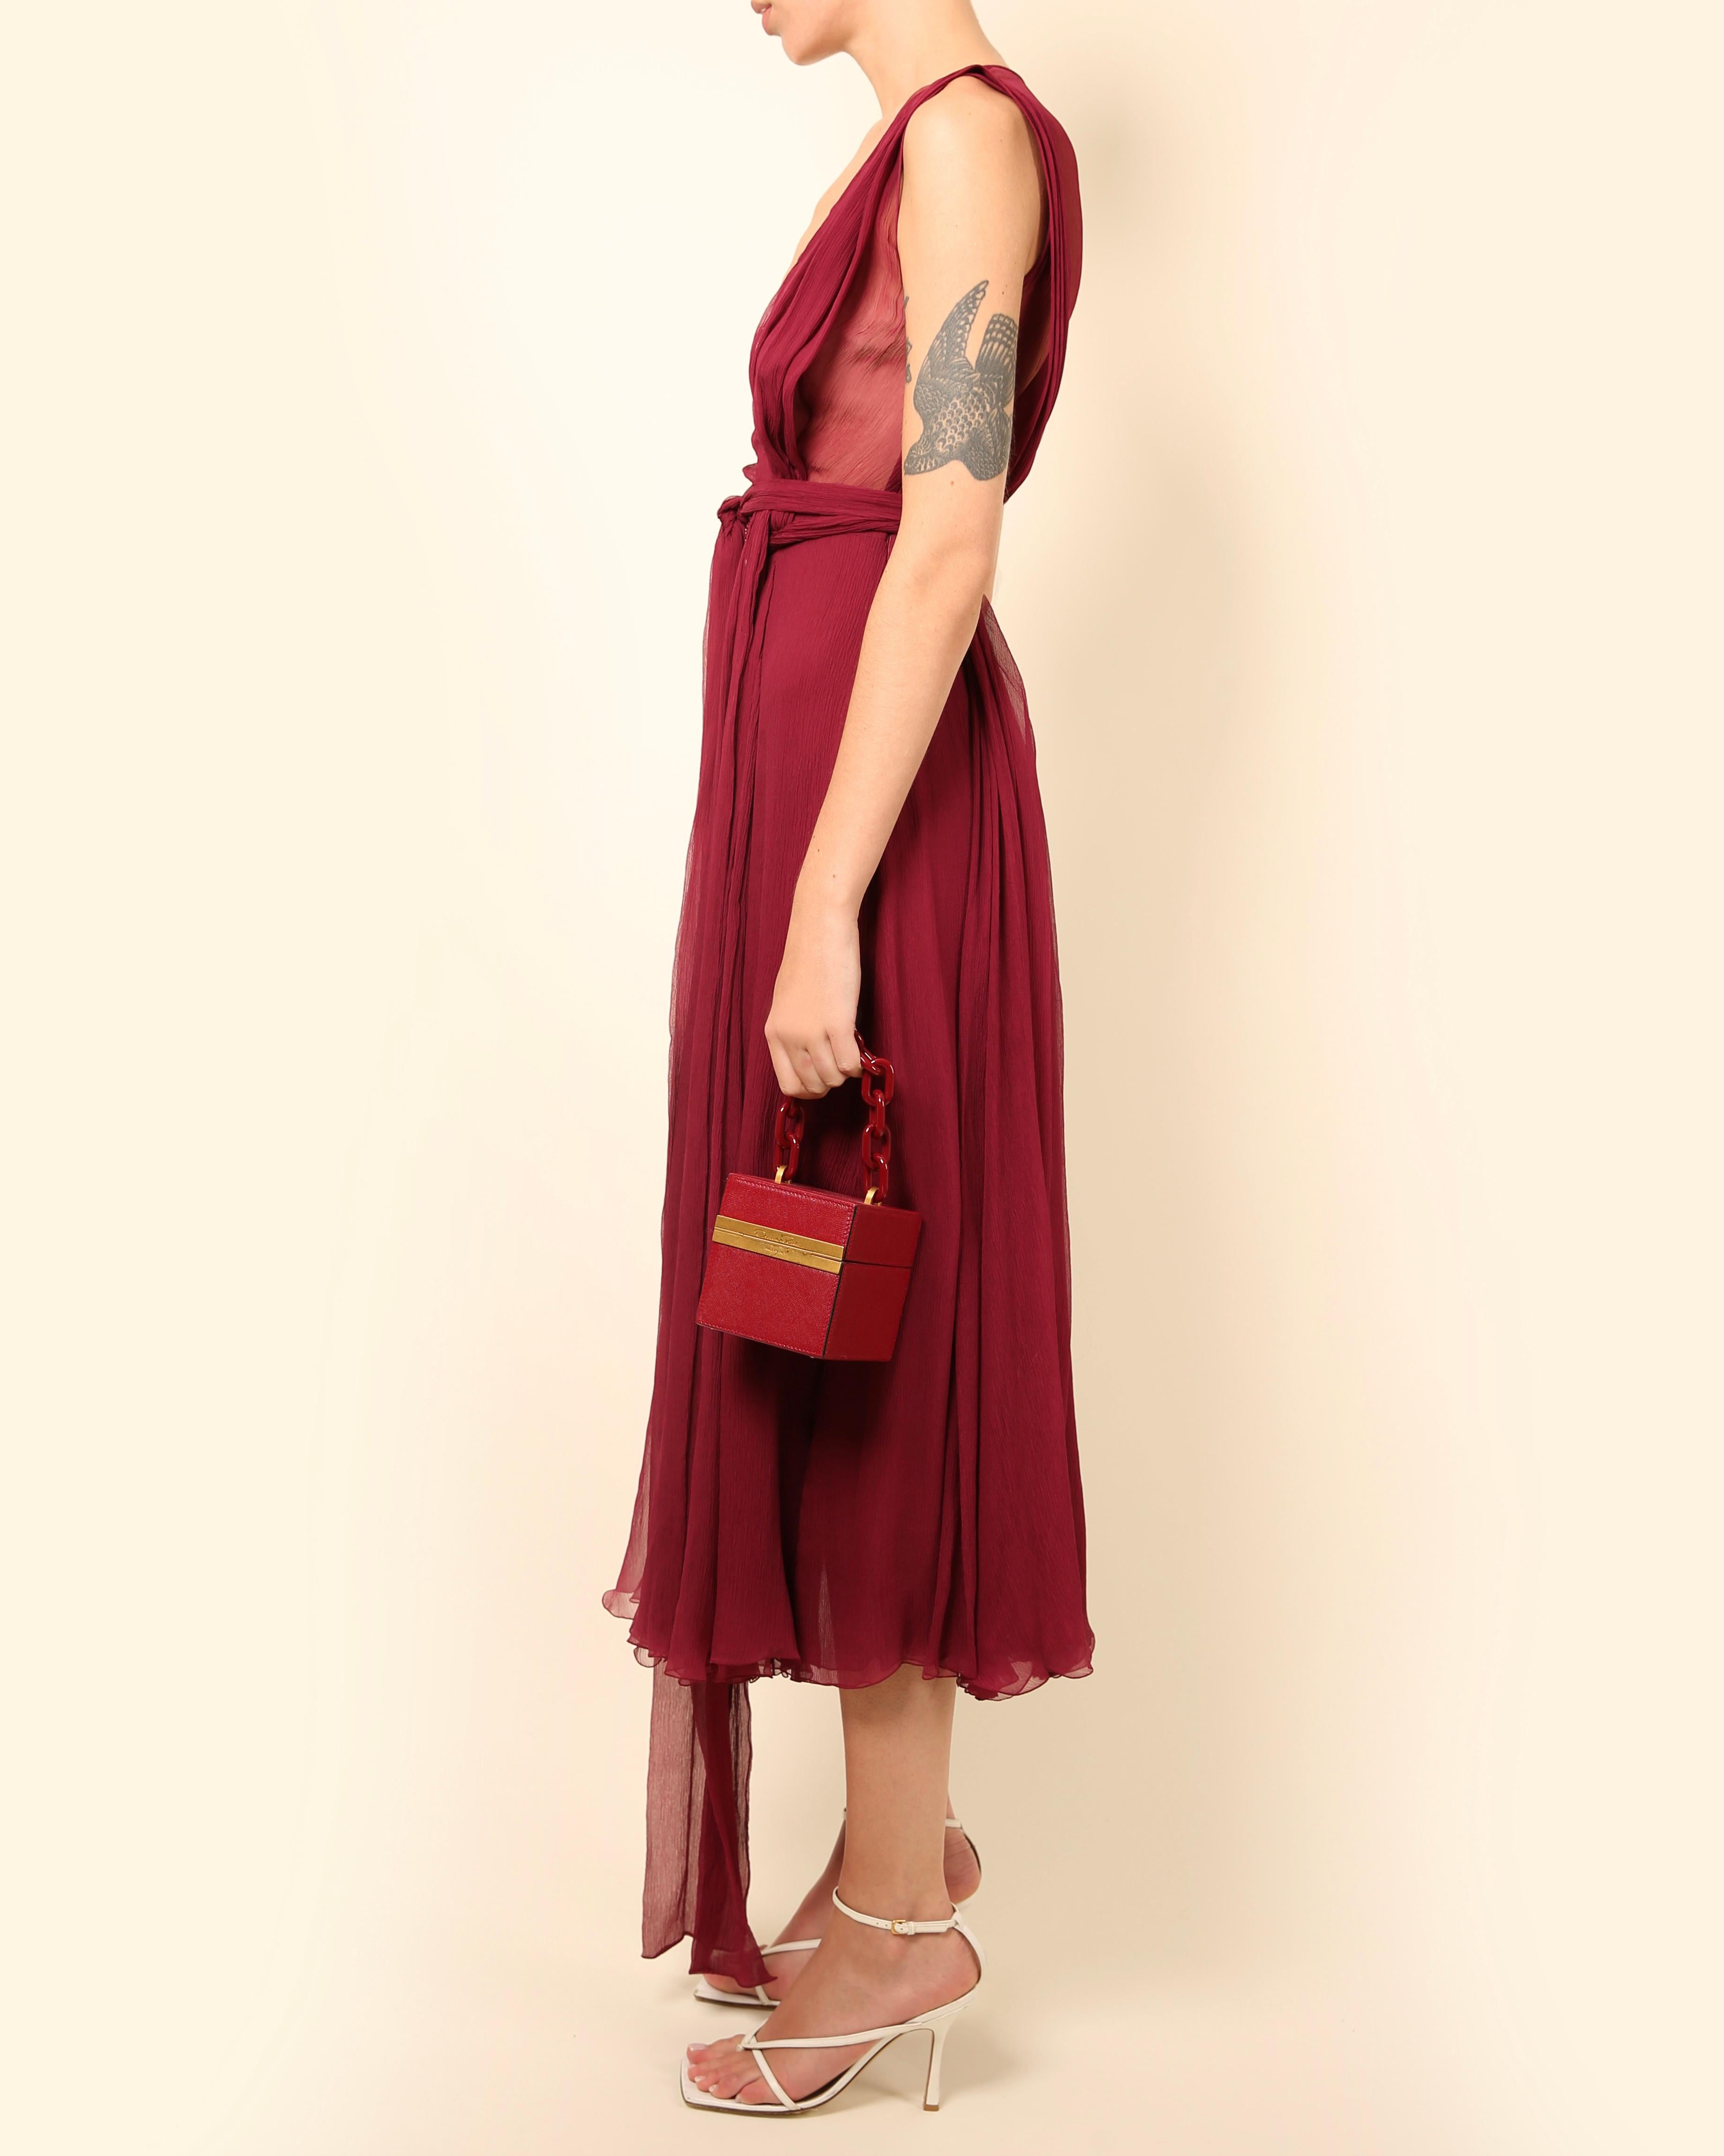 Gucci Fall 2011 burgundy chiffon silk plunging neckline sheer cut out gown dress For Sale 4